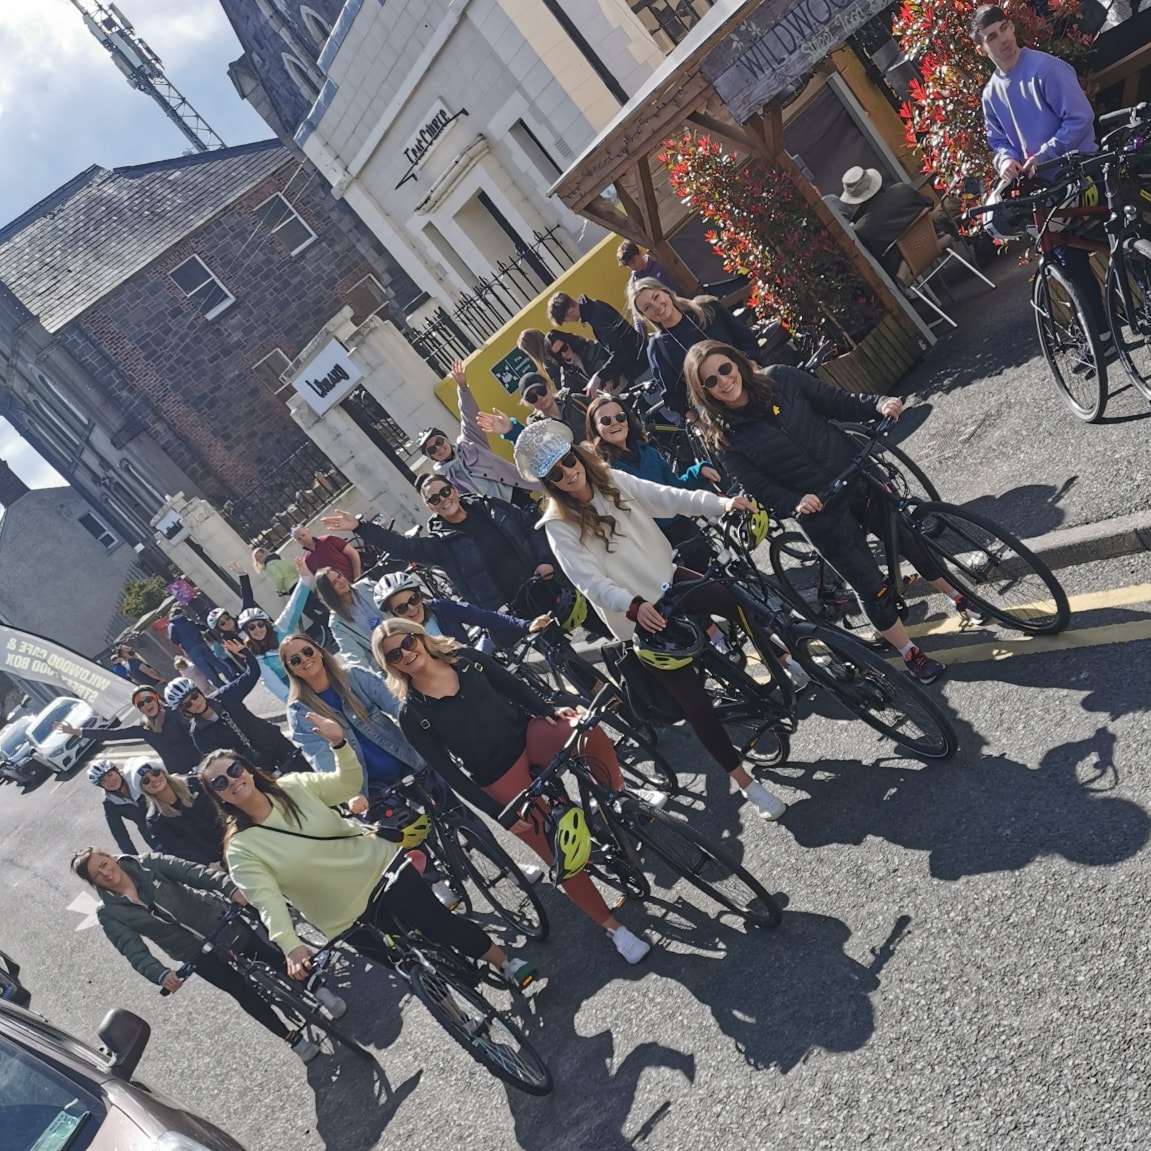 <span  class="uc_style_uc_tiles_grid_image_elementor_uc_items_attribute_title" style="color:#ffffff;">bike group</span>